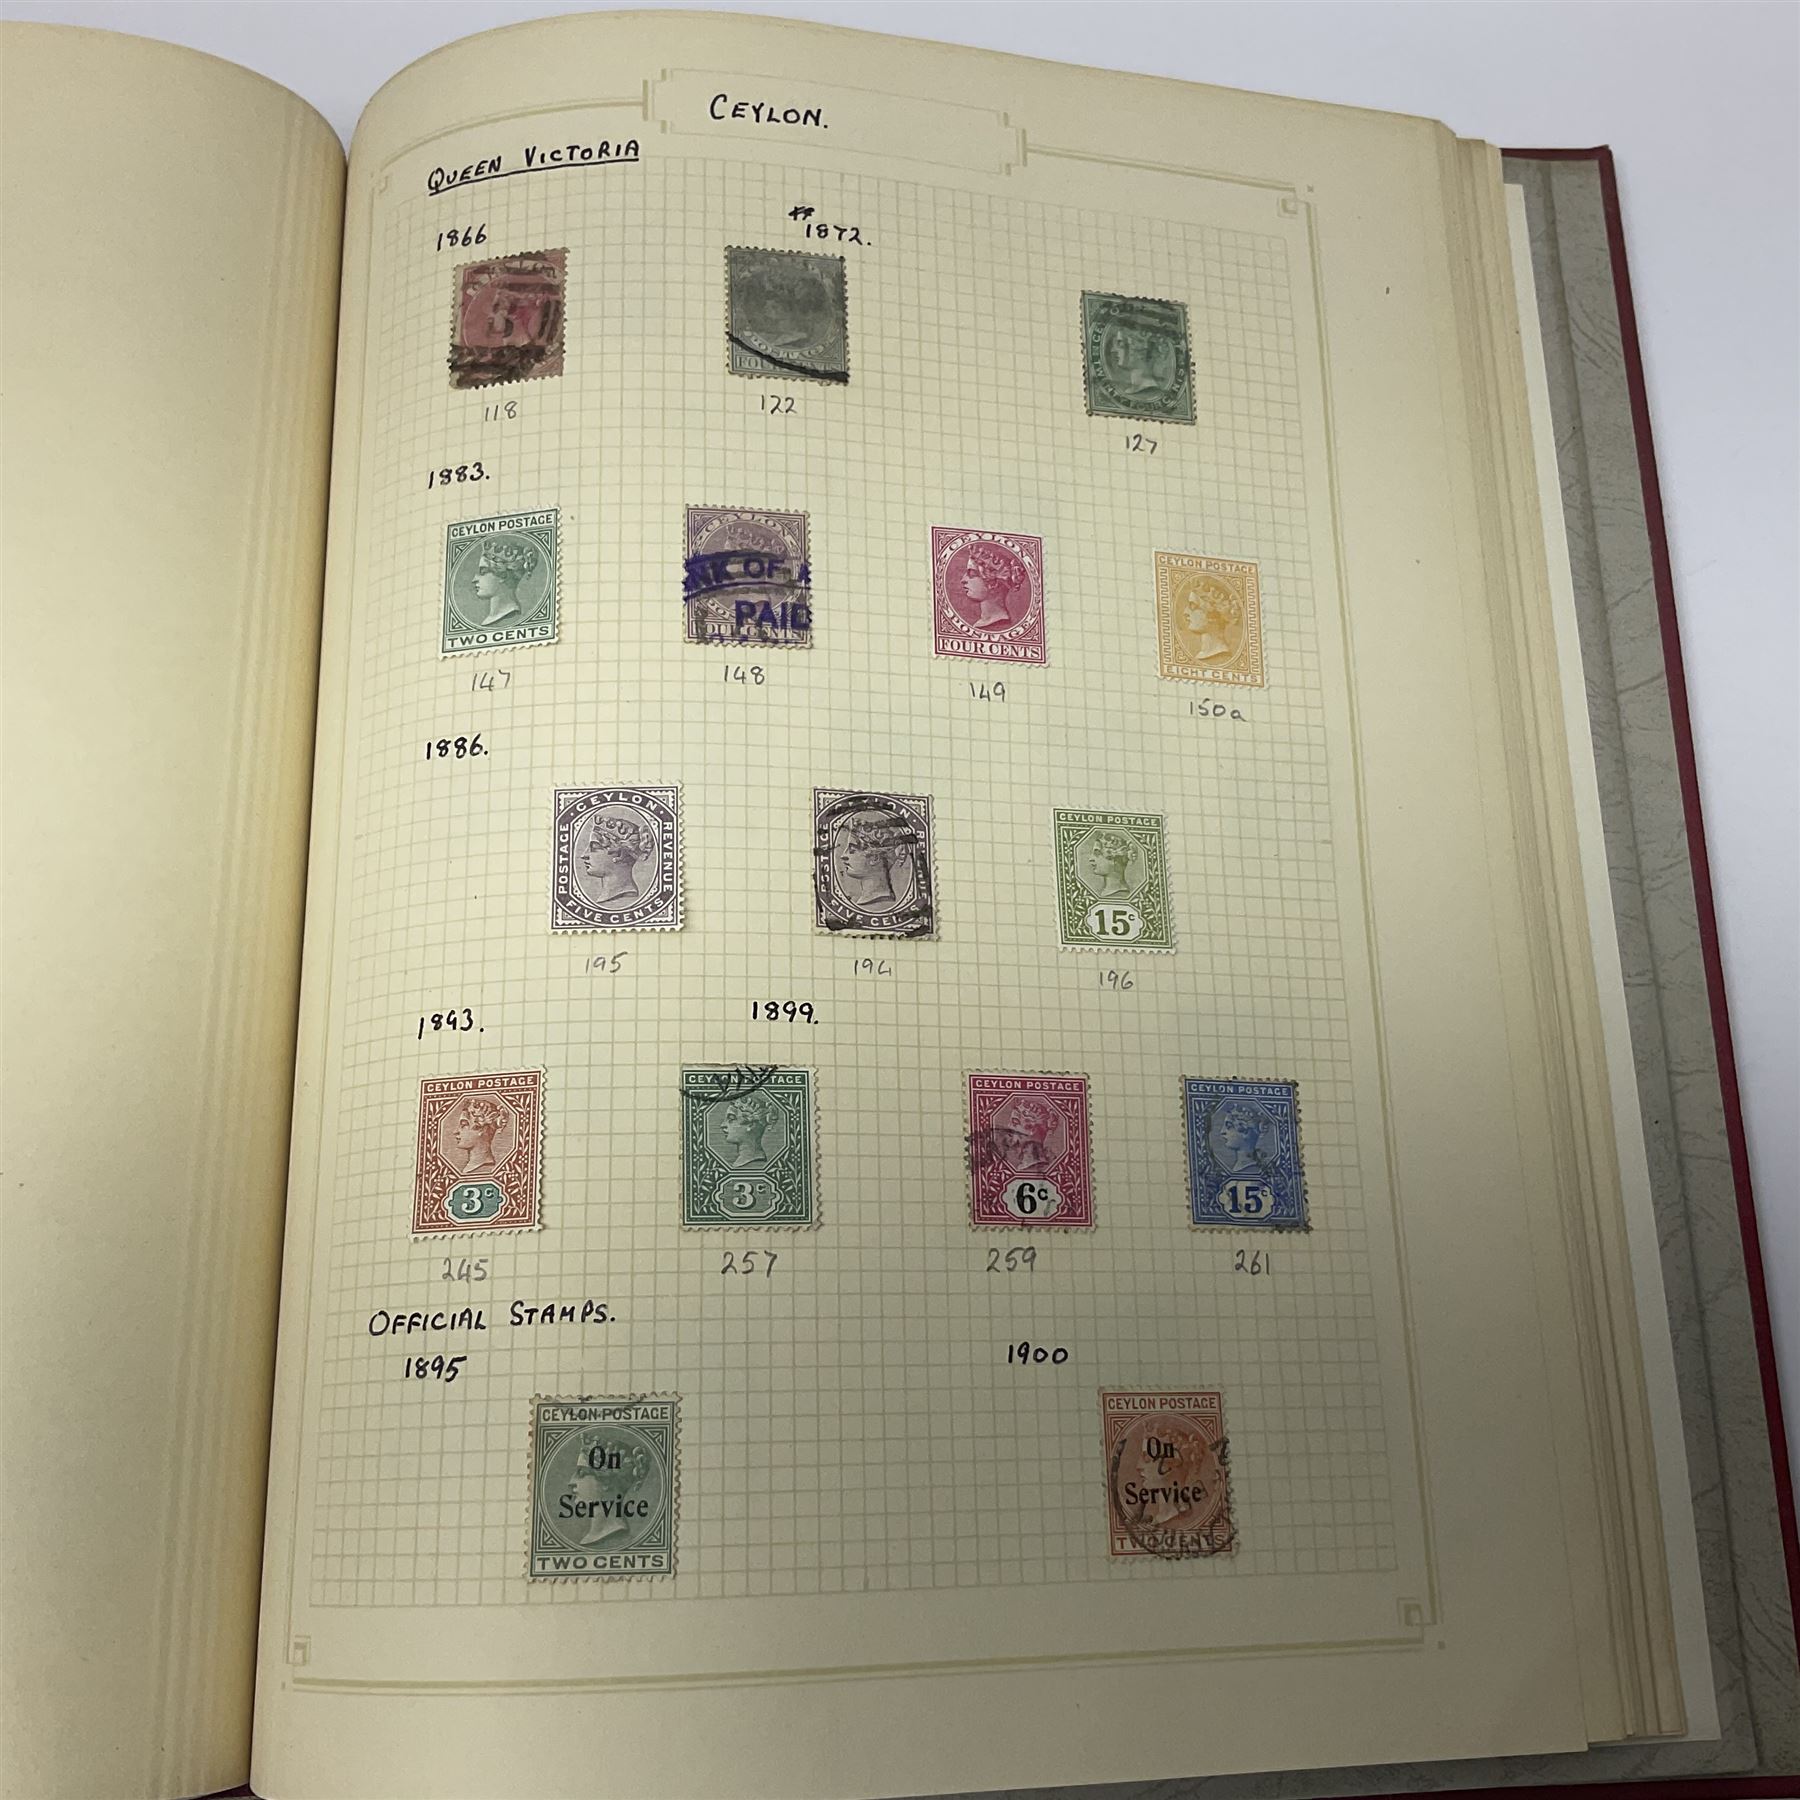 Queen Victoria and later Great British and World stamps - Image 22 of 25